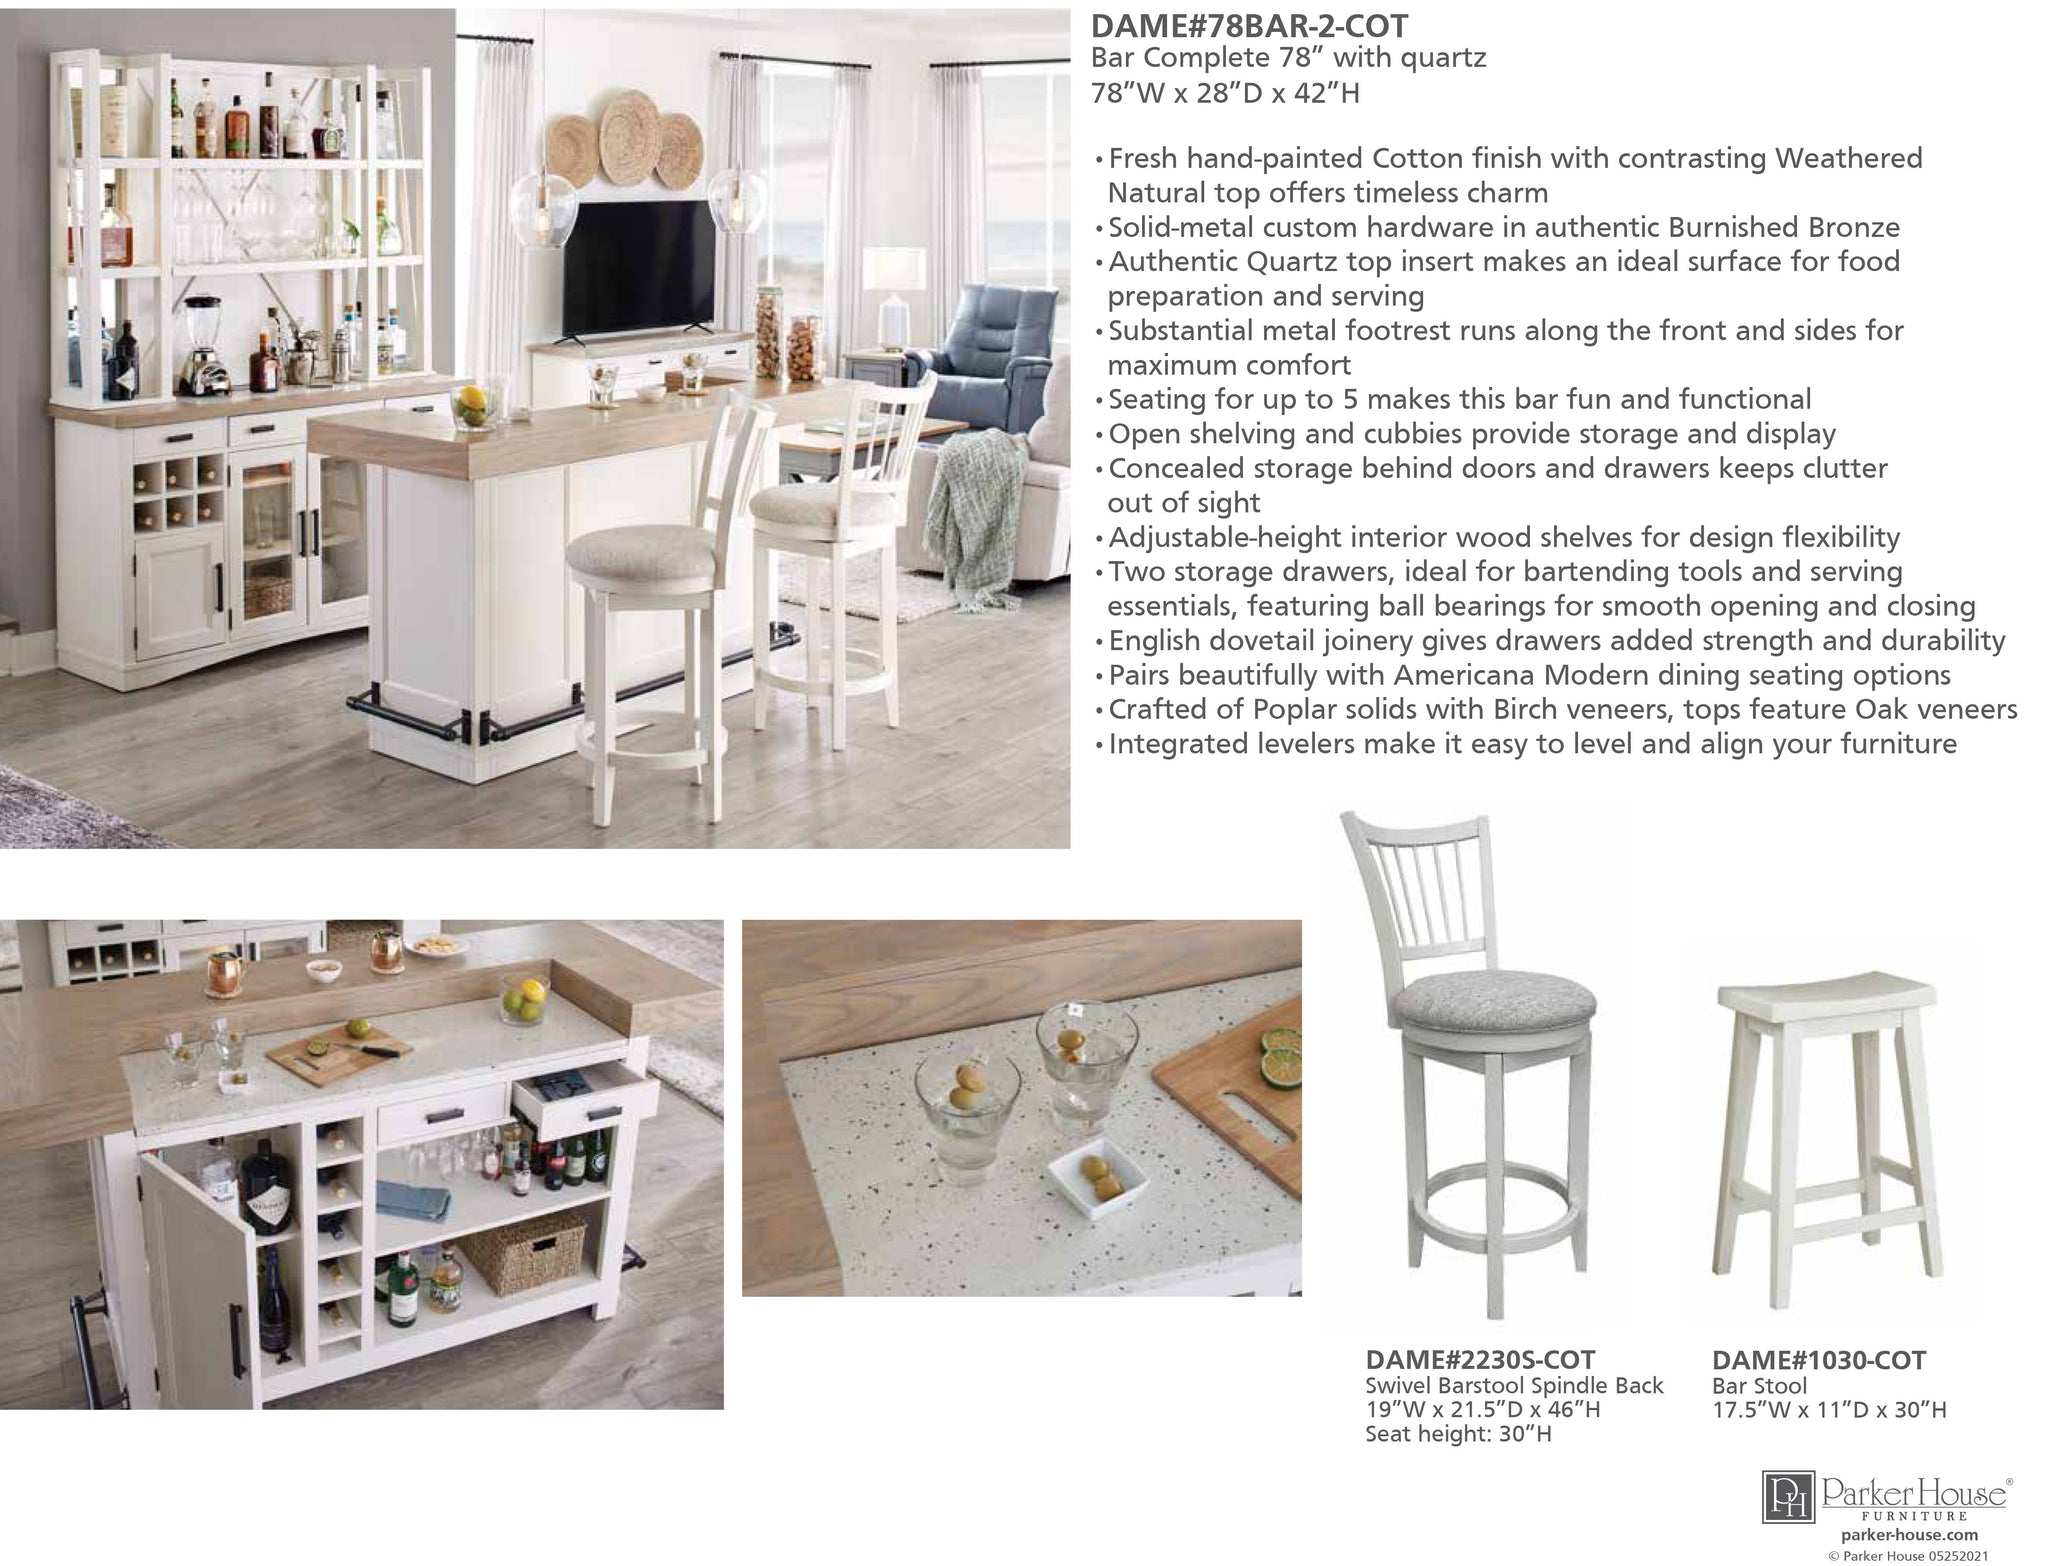 AMERICANA MODERN DINING in. Furniture Parker Bar with quartz 78 Complete House 